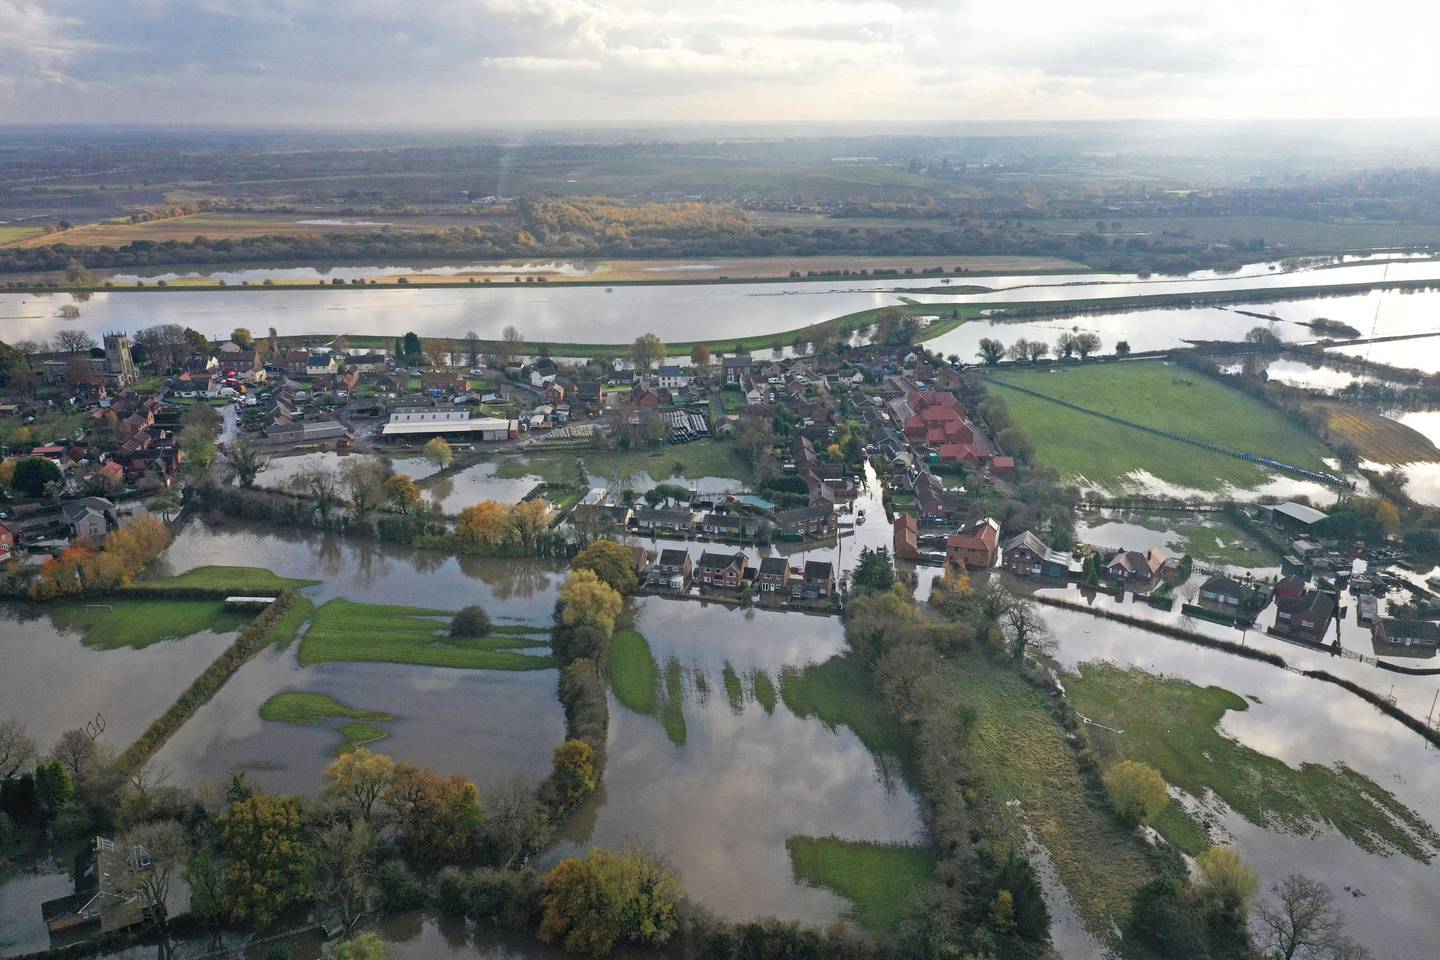 A general view of flooded homes in the village of Fishlake, South Yorkshire, England, Wednesday, Nov. 13, 2019. British Prime Minister Boris Johnson has received a frosty reception in flood-hit areas of northern England after victims of torrential rains lashed out at his slow response in coming to survey the damage.(Richard McCarthy/PA via AP)